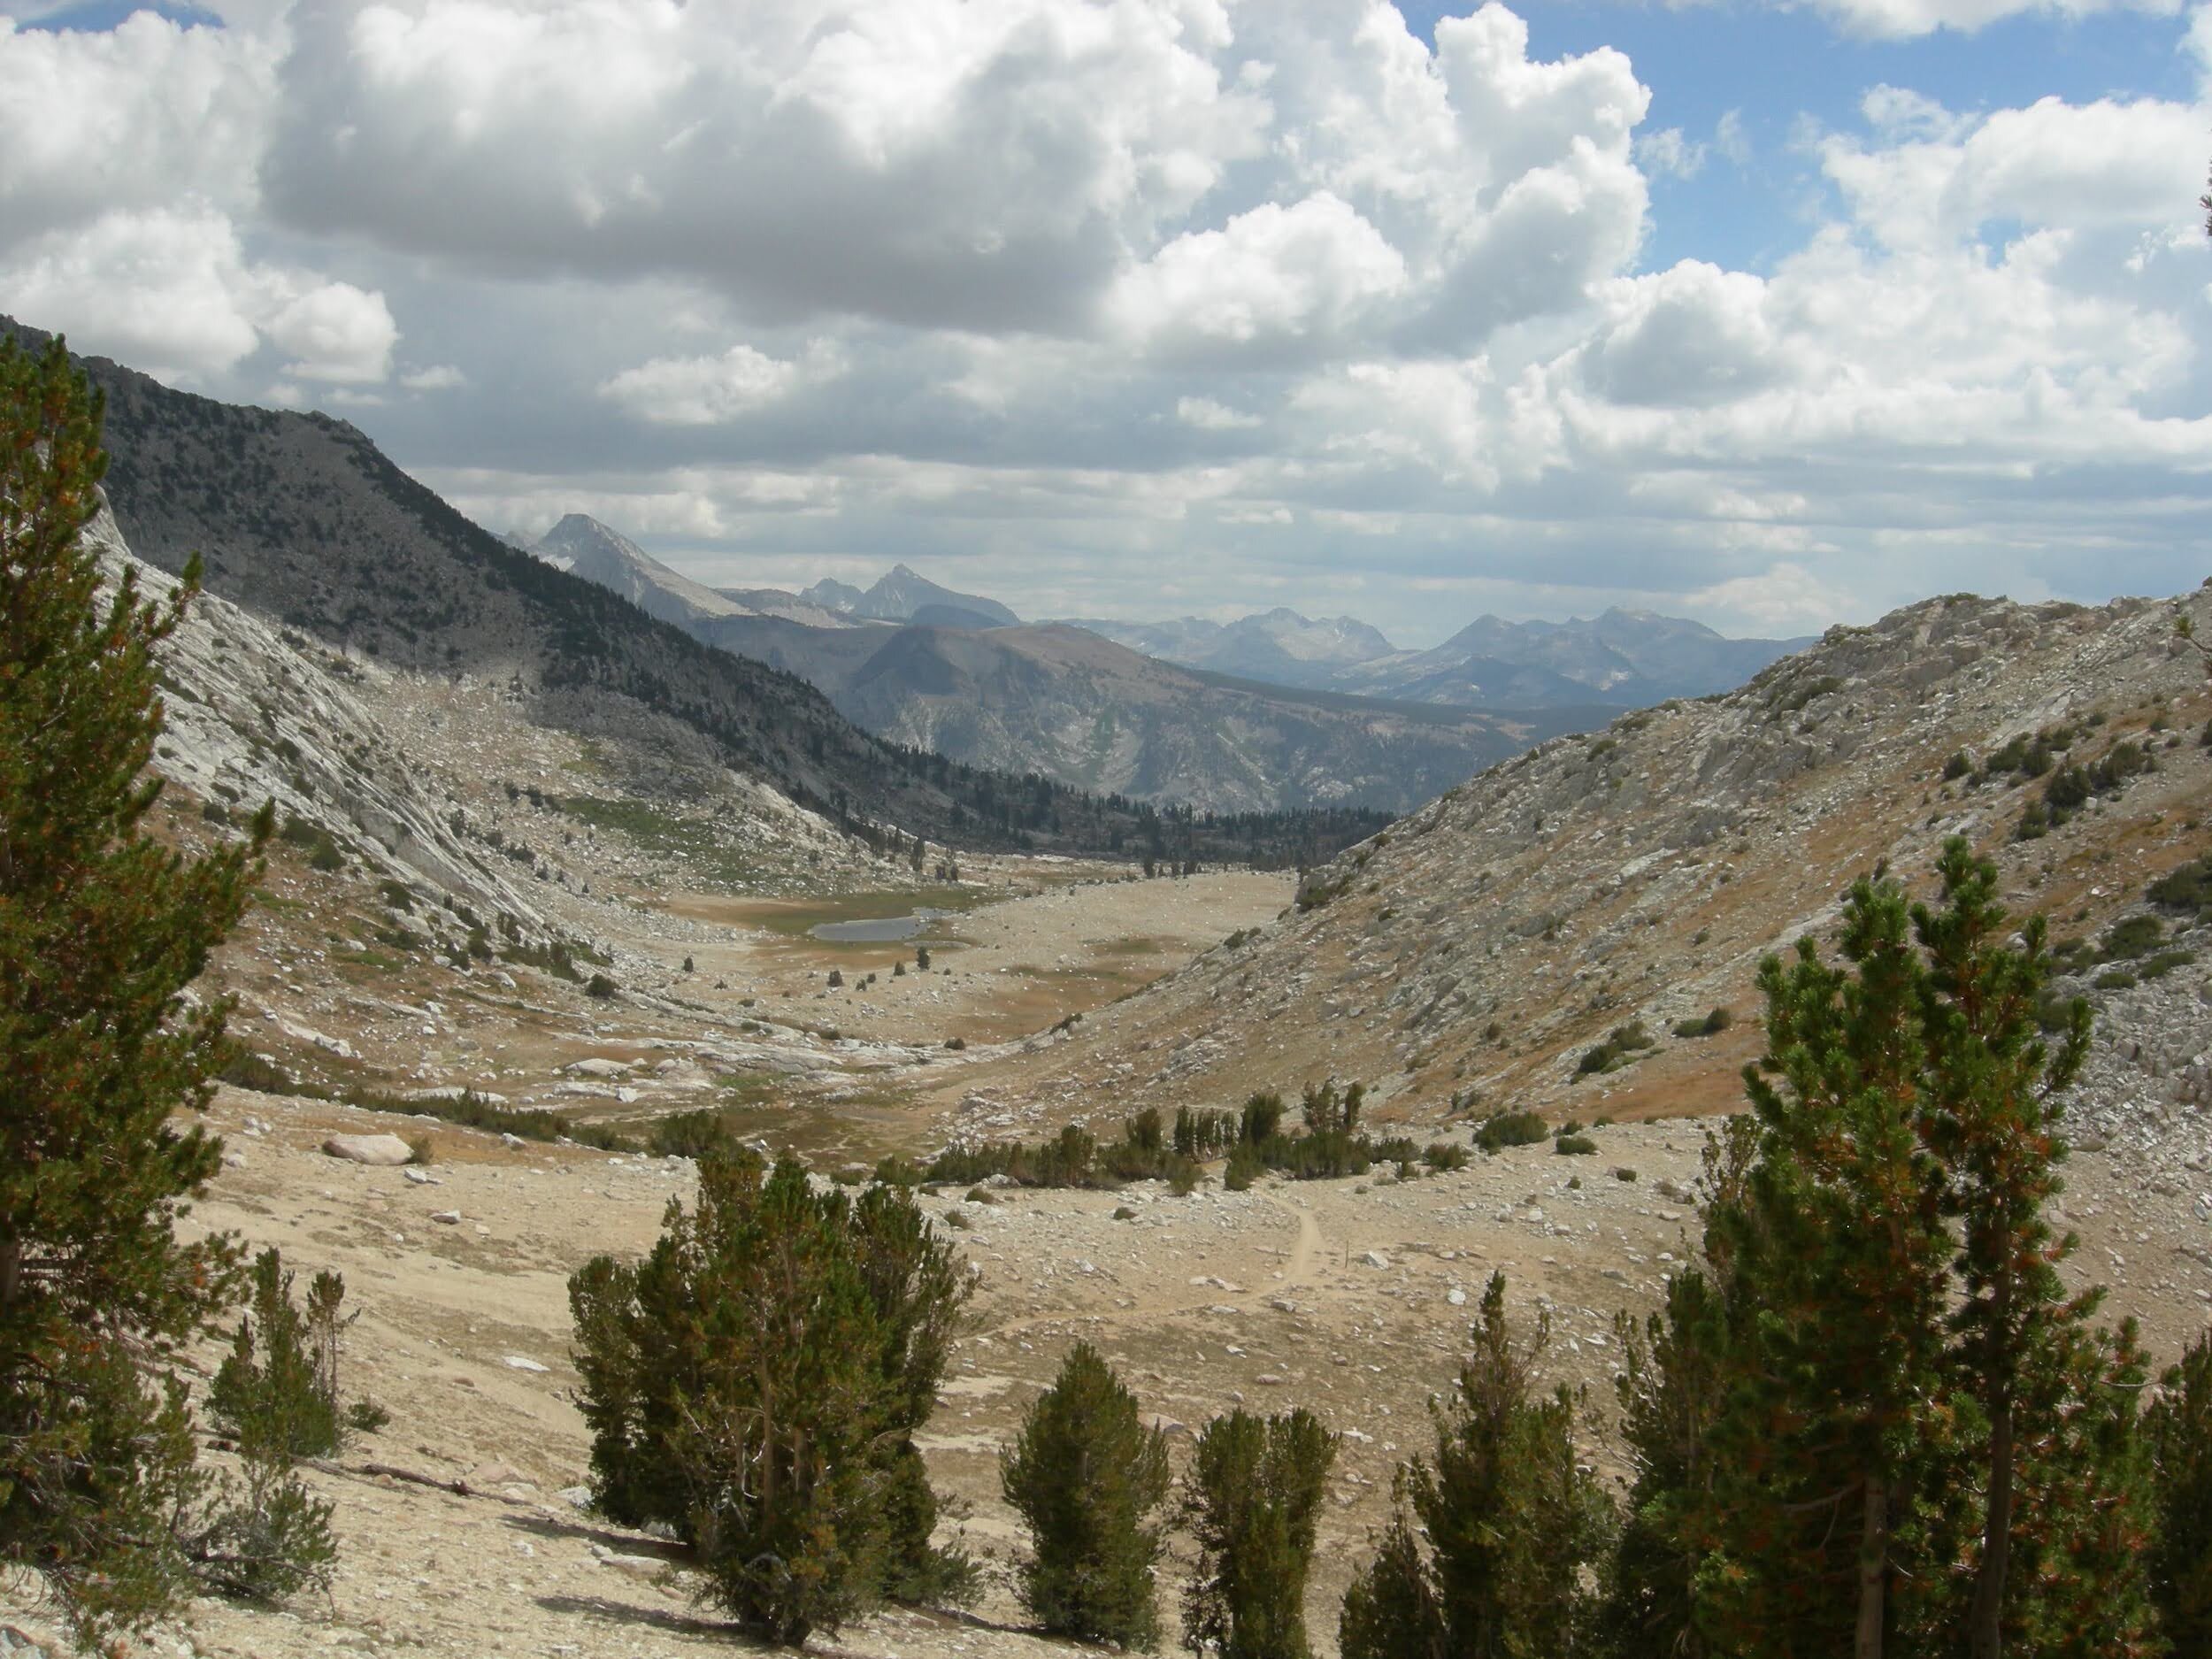 South of Silver Pass